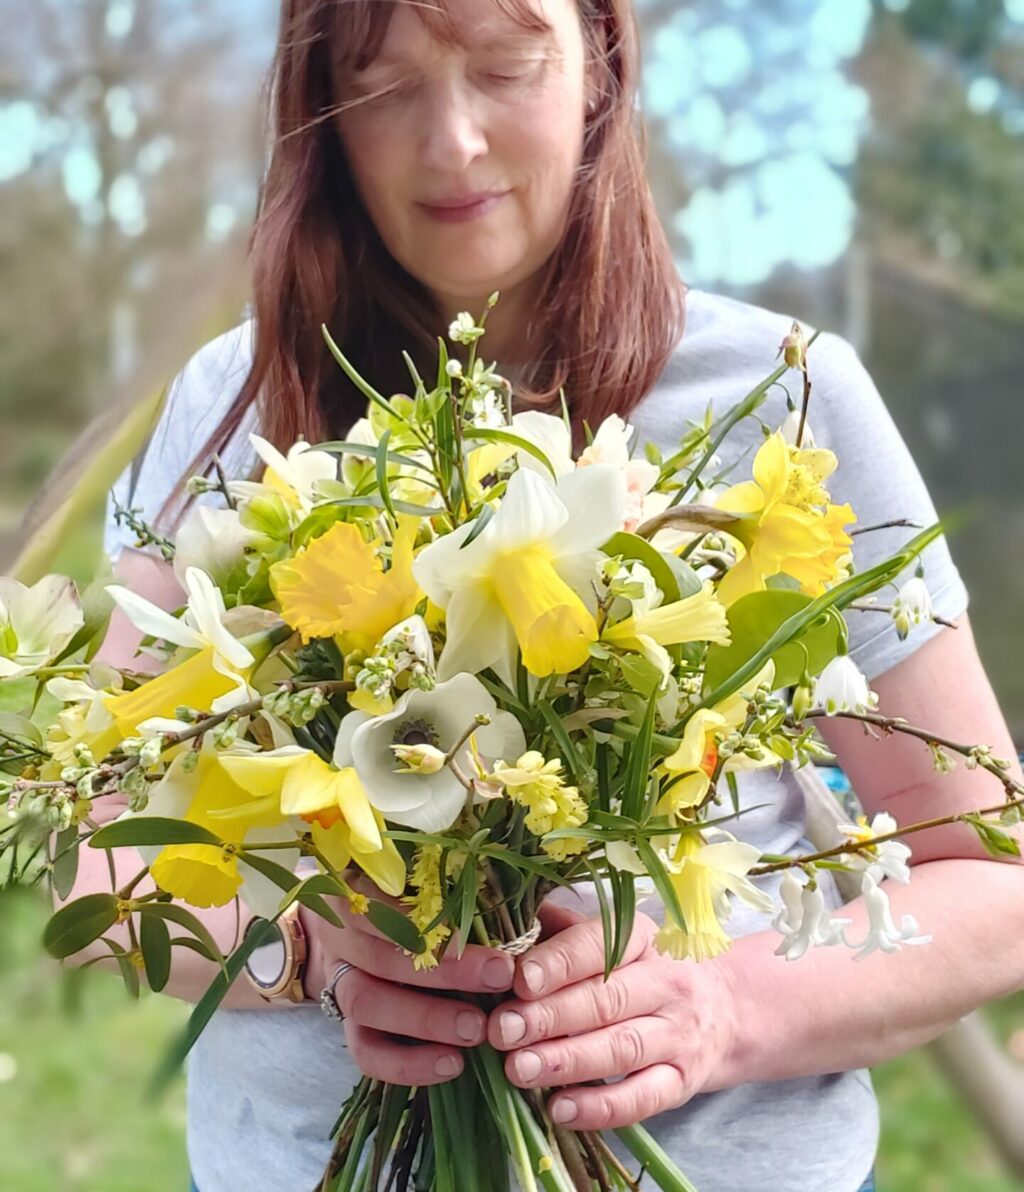 Kate of Camomile and Cornflowers stands in her flower field against a blue sky holding a bouquet of yellow daffodils.